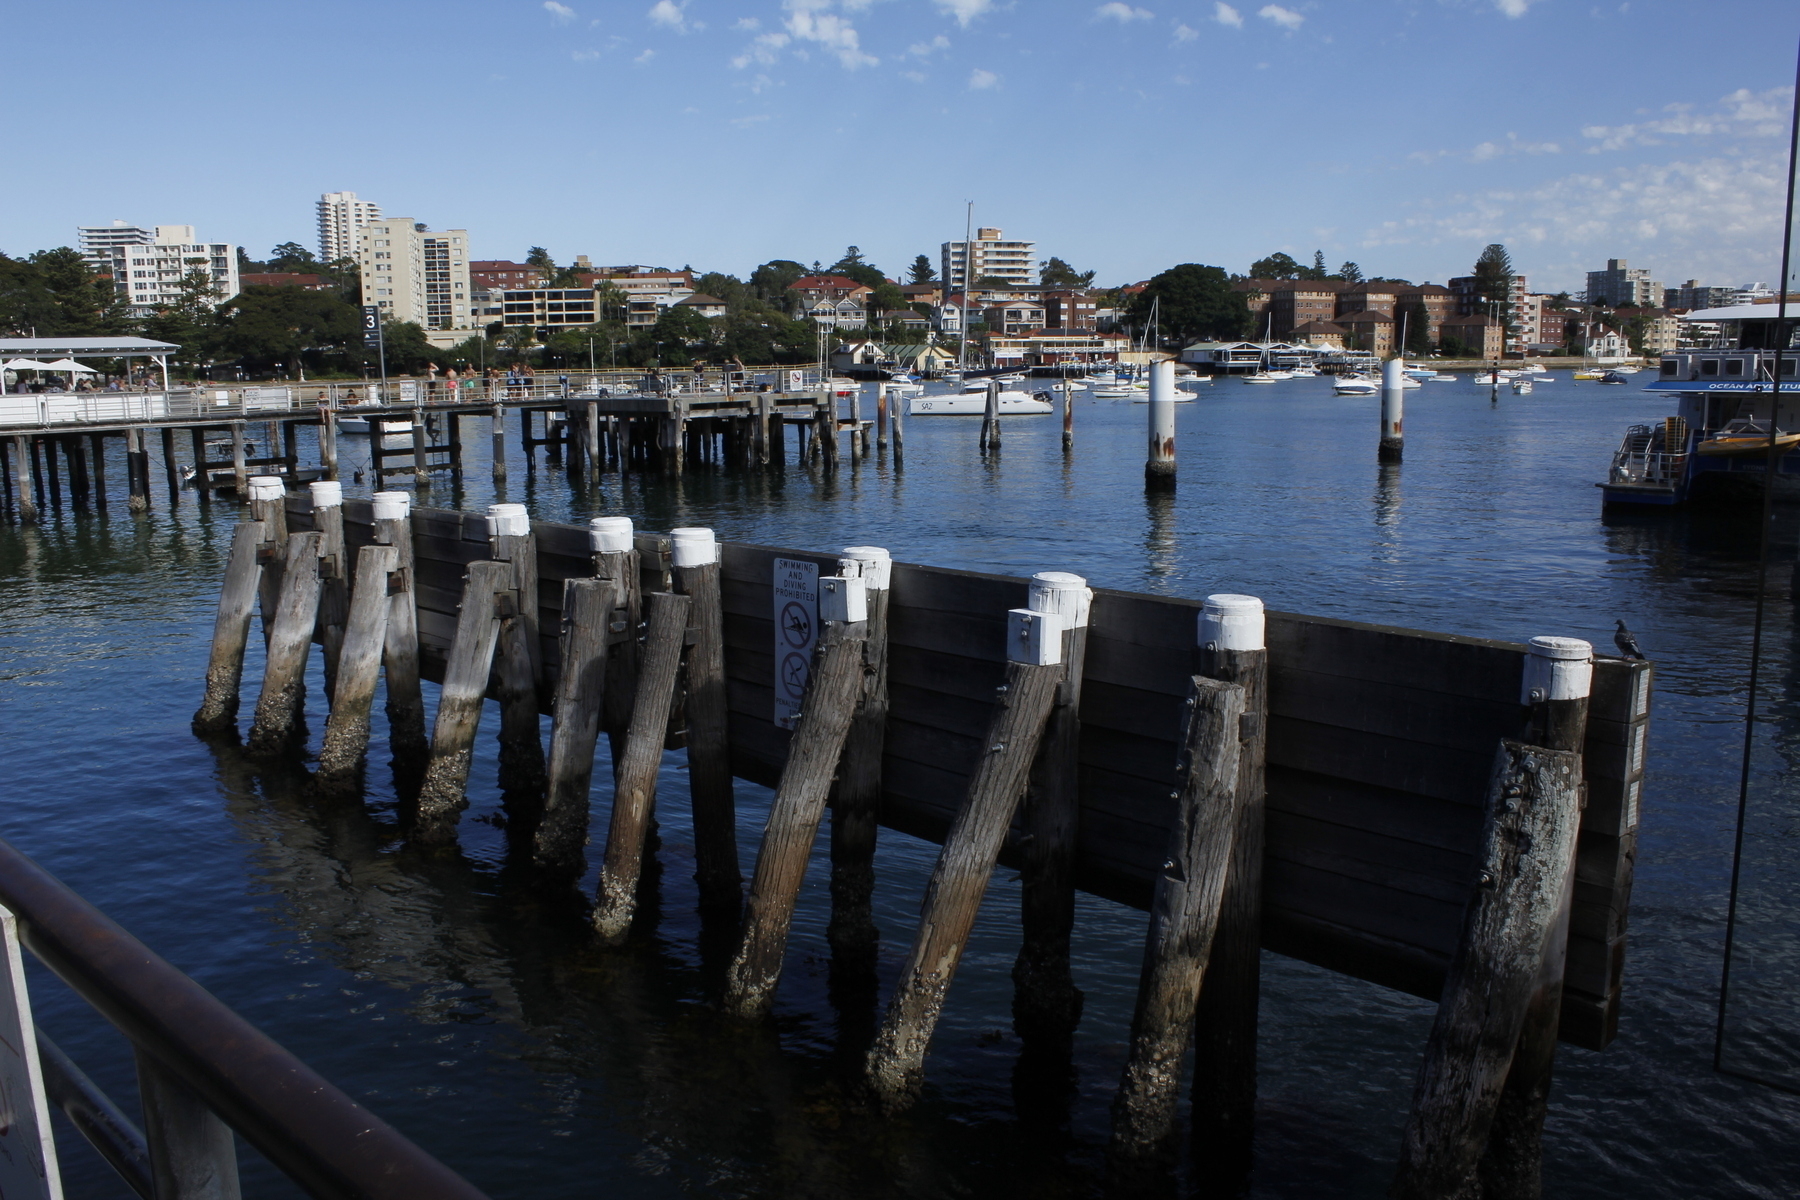 A harbour scene with pale blue sky and deep blue, glistening water. Blocks of flats, houses and trees in the distance. In the foreground, in the water, an old timber safety barrier crosses from bottom right to middle left. The barrier is made of long, heavy timber beams laid horizontally, supported by vertical timber pylons disappearing into the water, with a crust of barnacles. Angled pylons further support these, and everything is reflected in the gently rippled water. A sign on the back of the barrier says: ‘Swimming and diving prohibited’. In the middle distance is a long jetty with a colourful group of figures standing in the sun. Below, in blurry silhouette, a girl climbs a ladder from the water, and a second girl, still in the water, clings to a rope strung between two pylons.